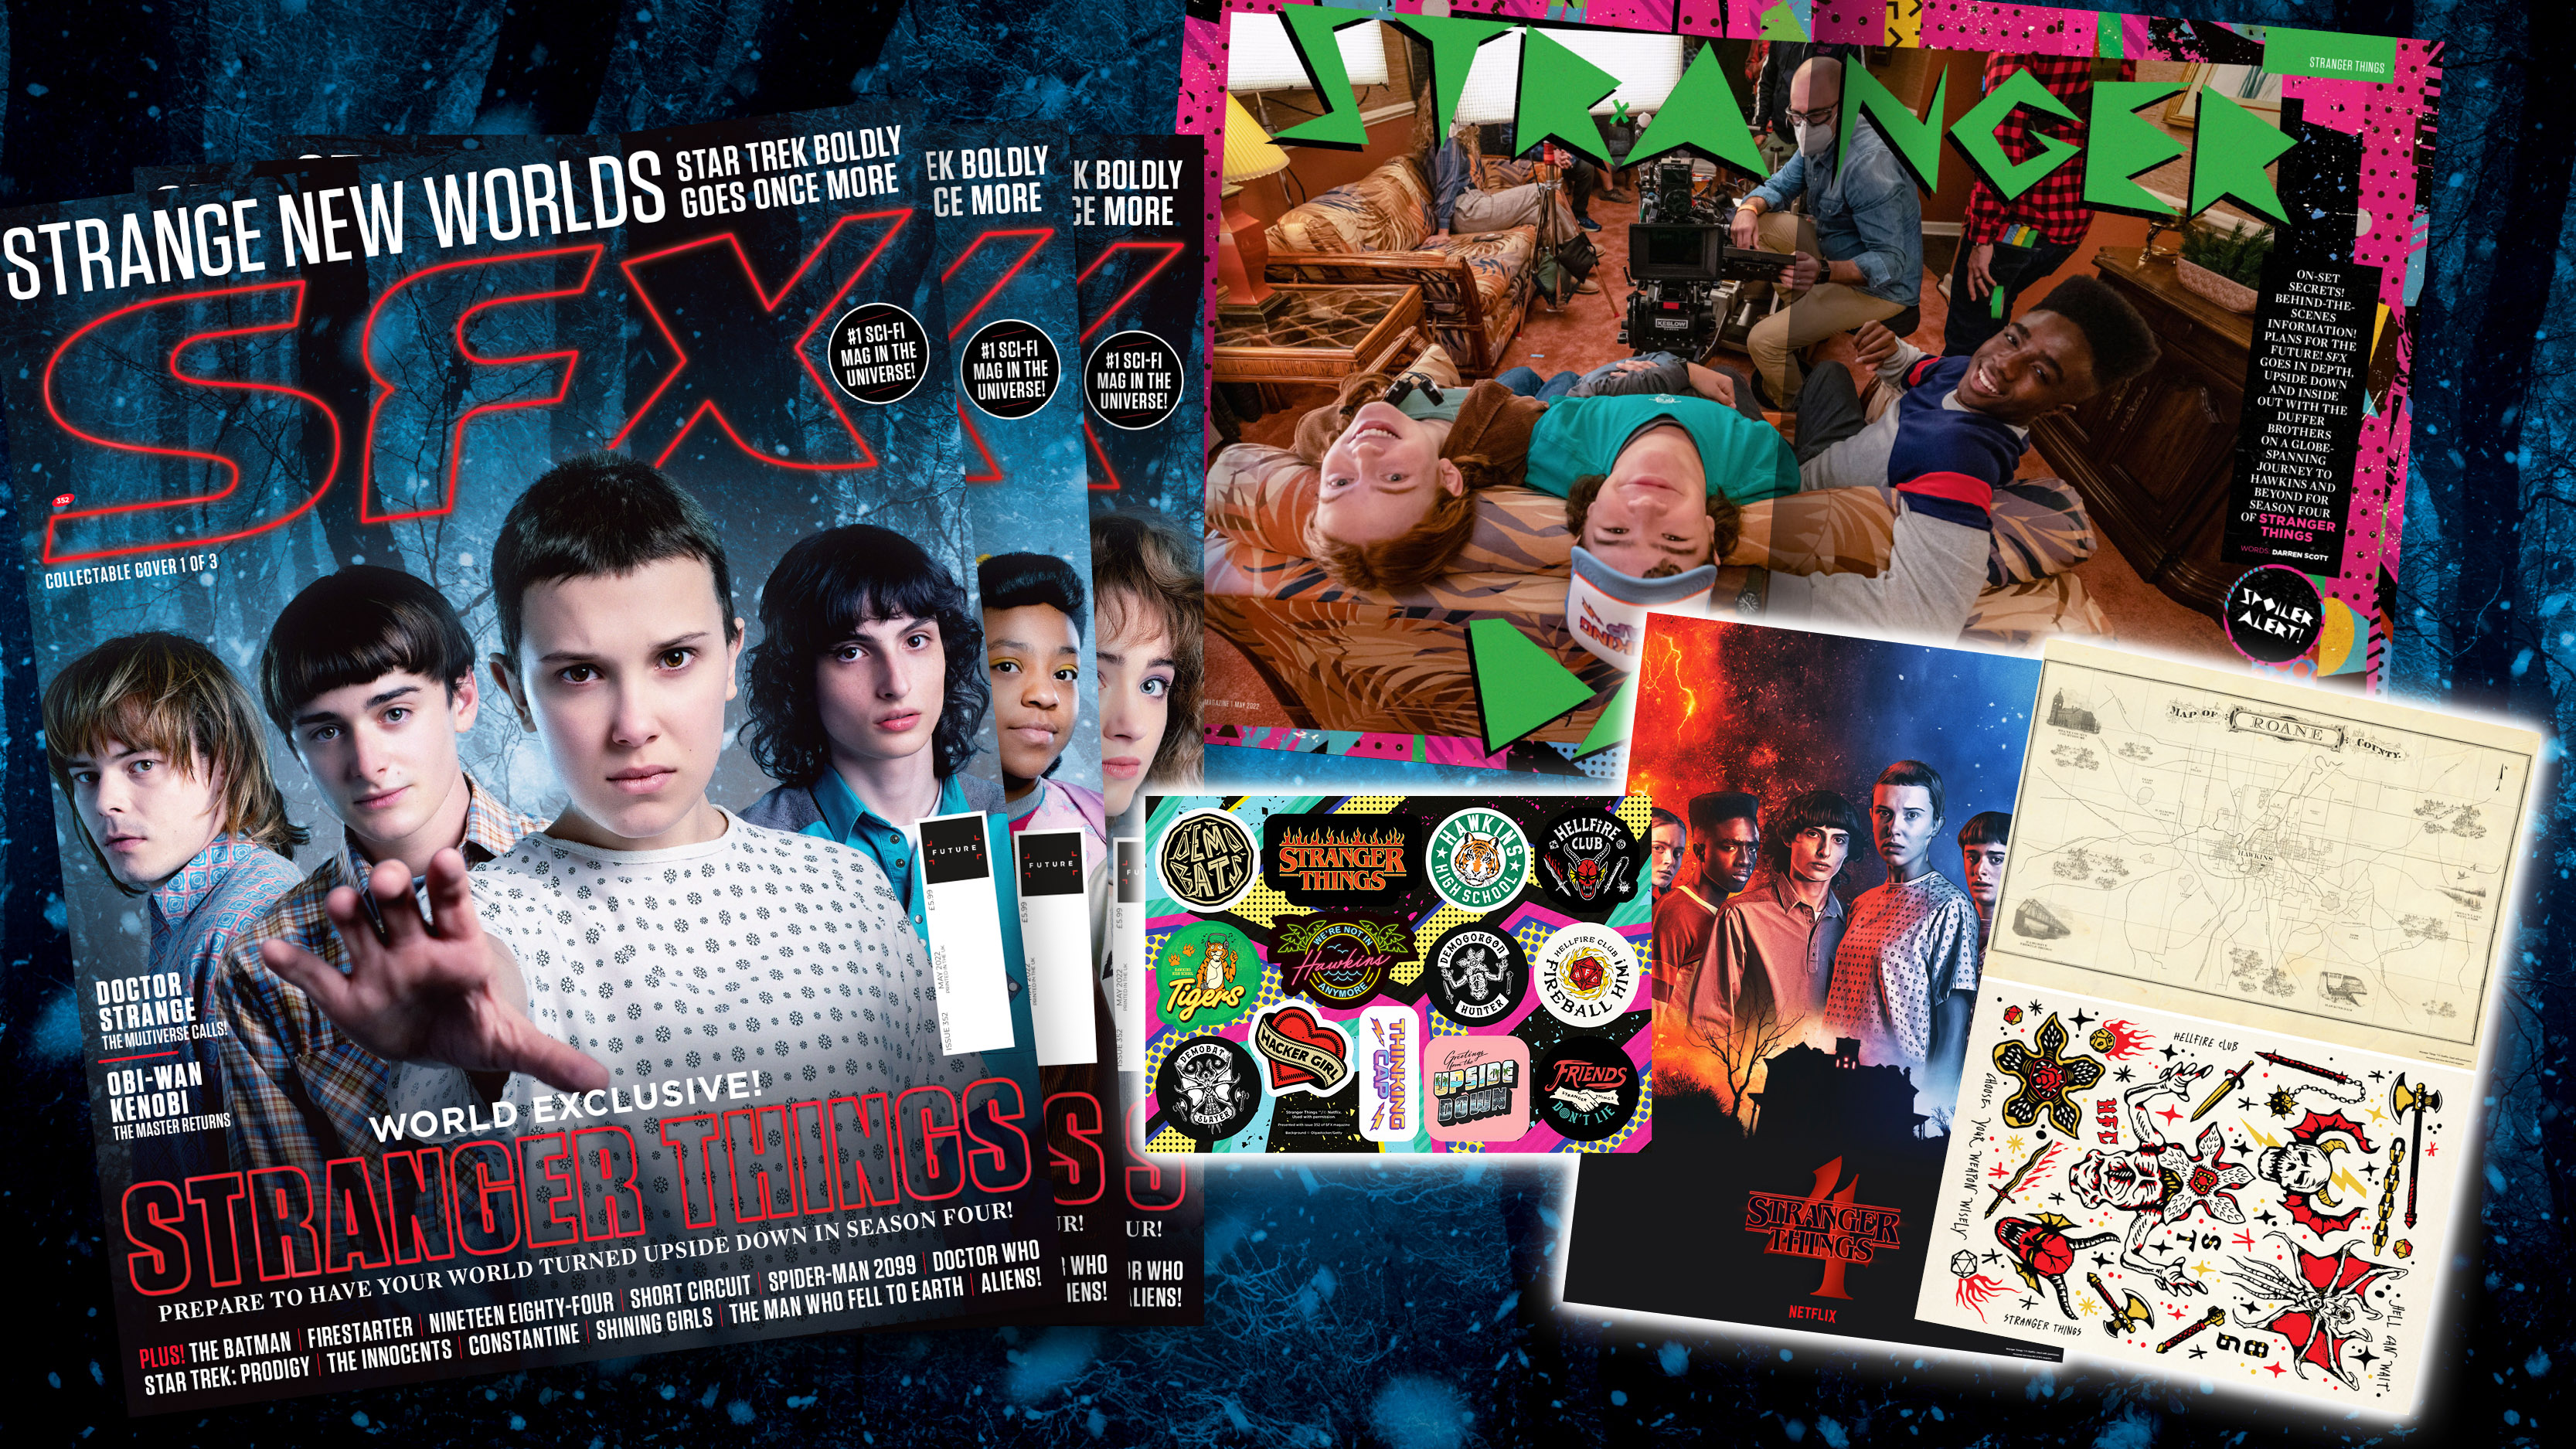 The Stranger Things covers and giveaways from SFX issue 352. 